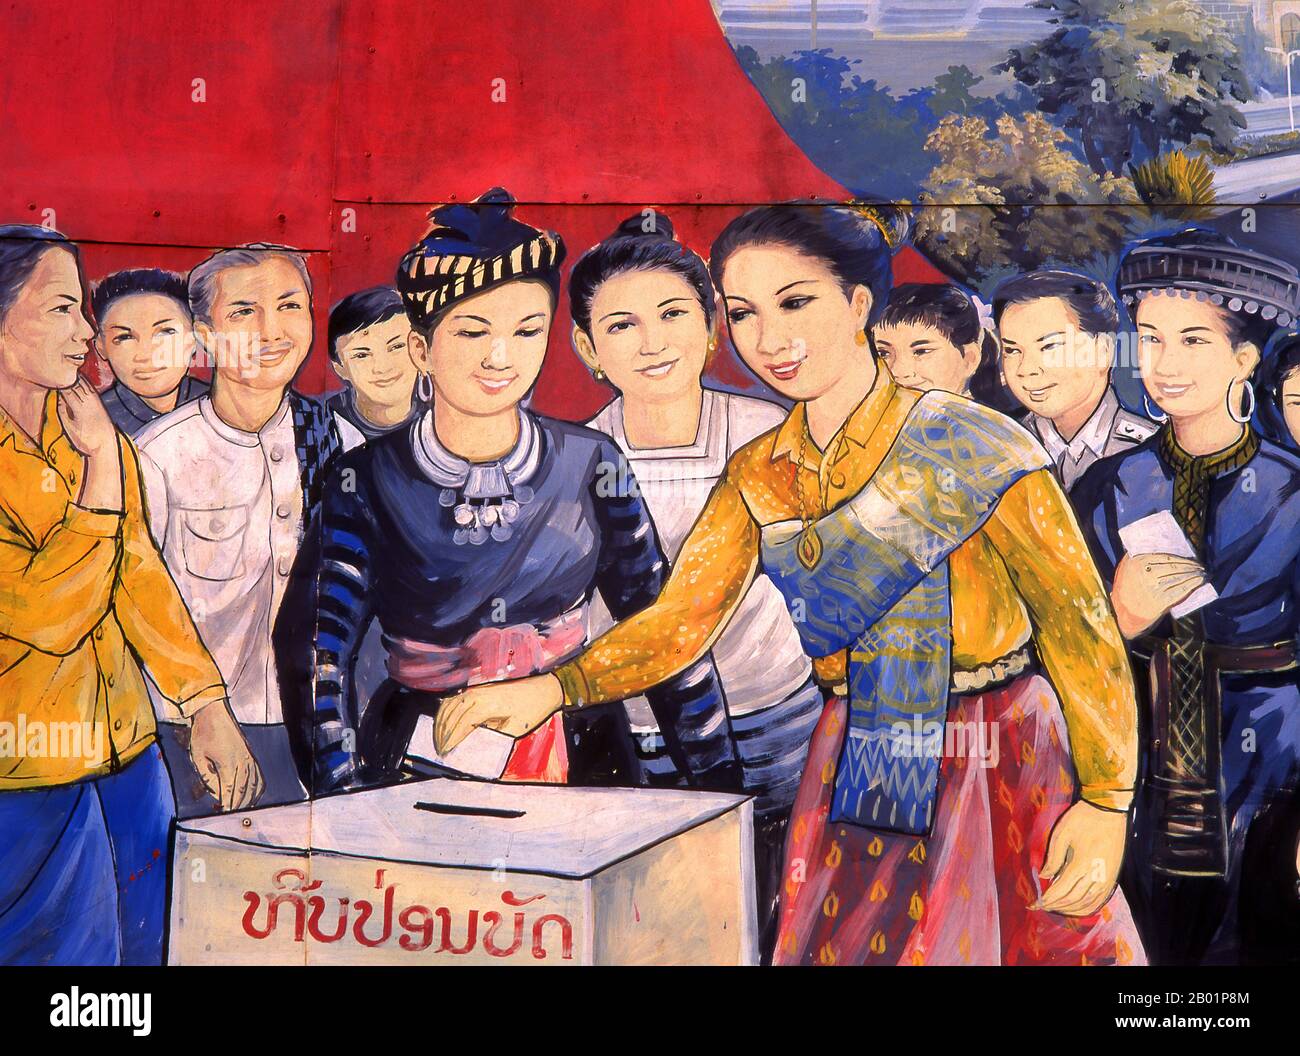 Laos: Lao and various minority peoples visit the ballot box, Revolutionary Socialist realist-style political poster on the streets of Vientiane.  Socialist realism is a style of realistic art which was developed in the Soviet Union and became a dominant style in other communist countries. Socialist realism is a teleologically-oriented style having its purpose the furtherance of the goals of socialism and communism. Although related, it should not be confused with social realism, a type of art that realistically depicts subjects of social concern. Stock Photo